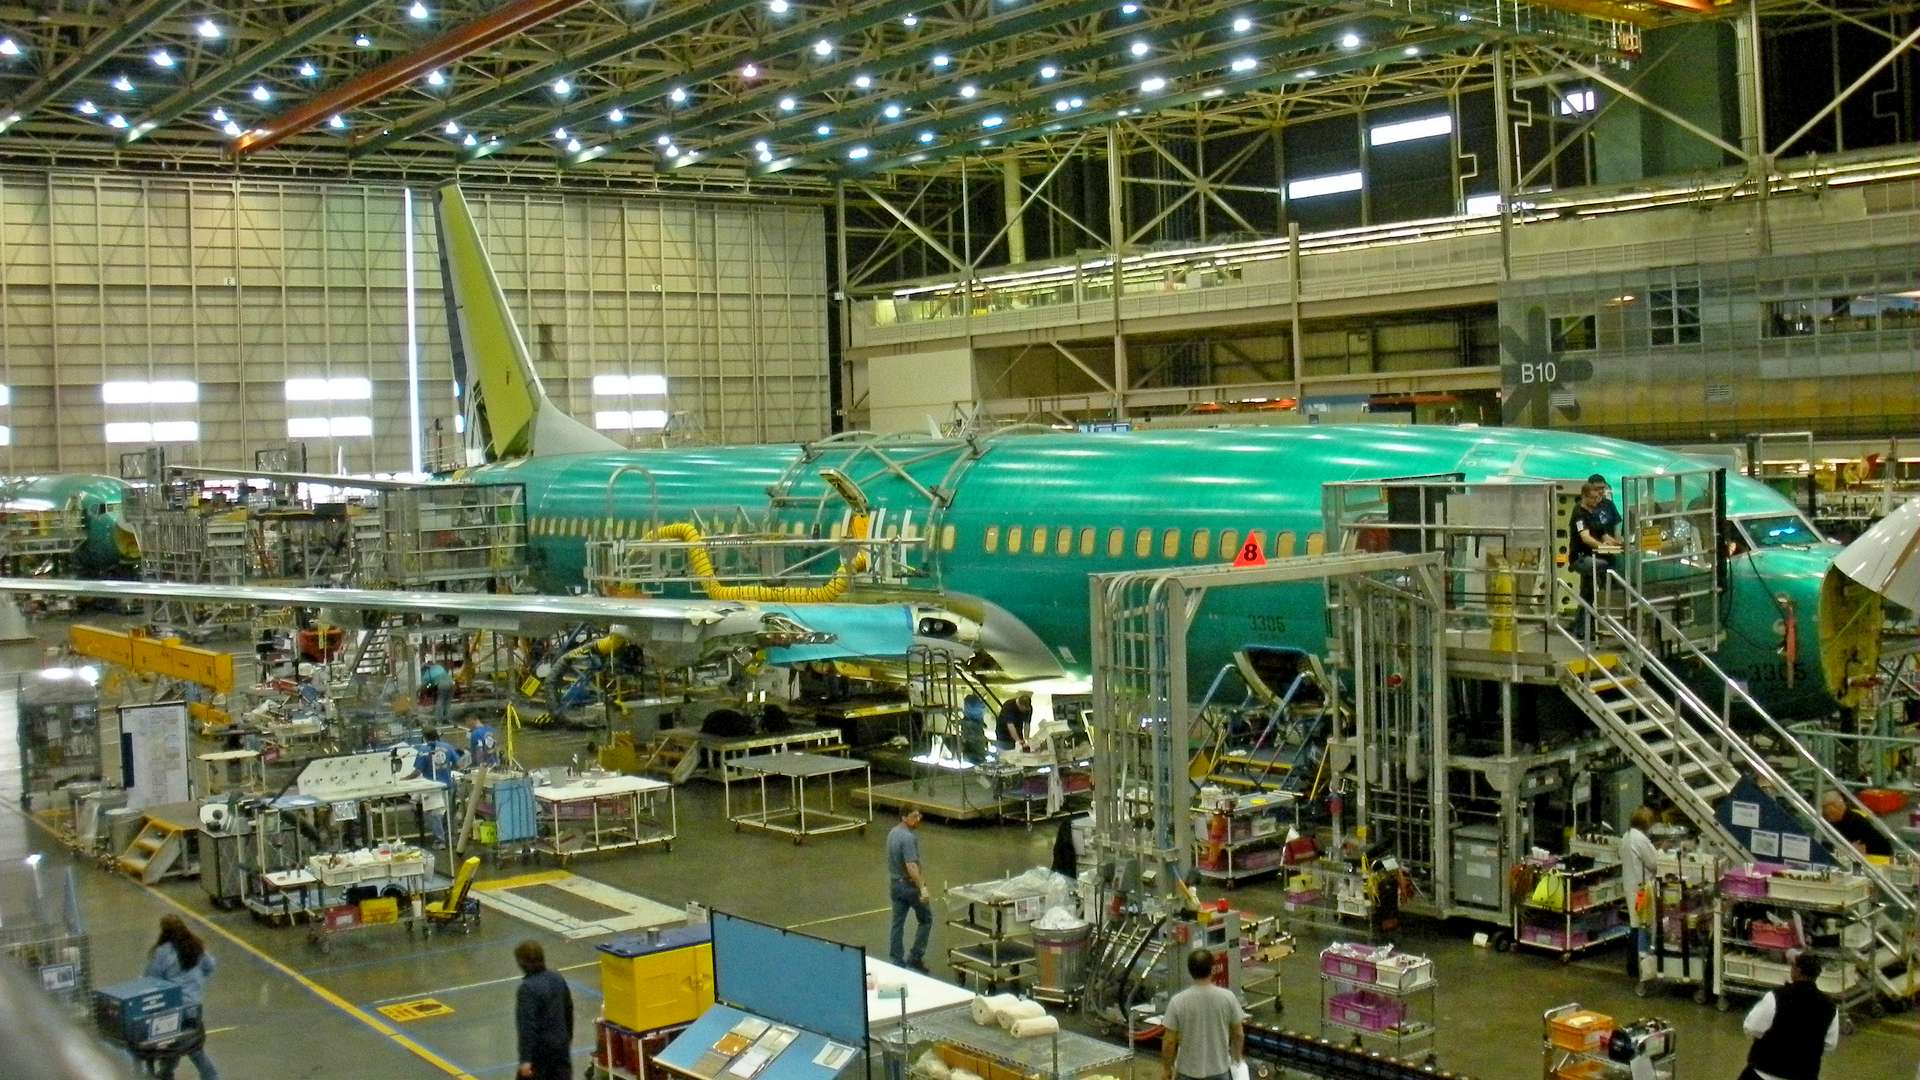 737 MAX Production Woes Push Up Demand For Existing Jets